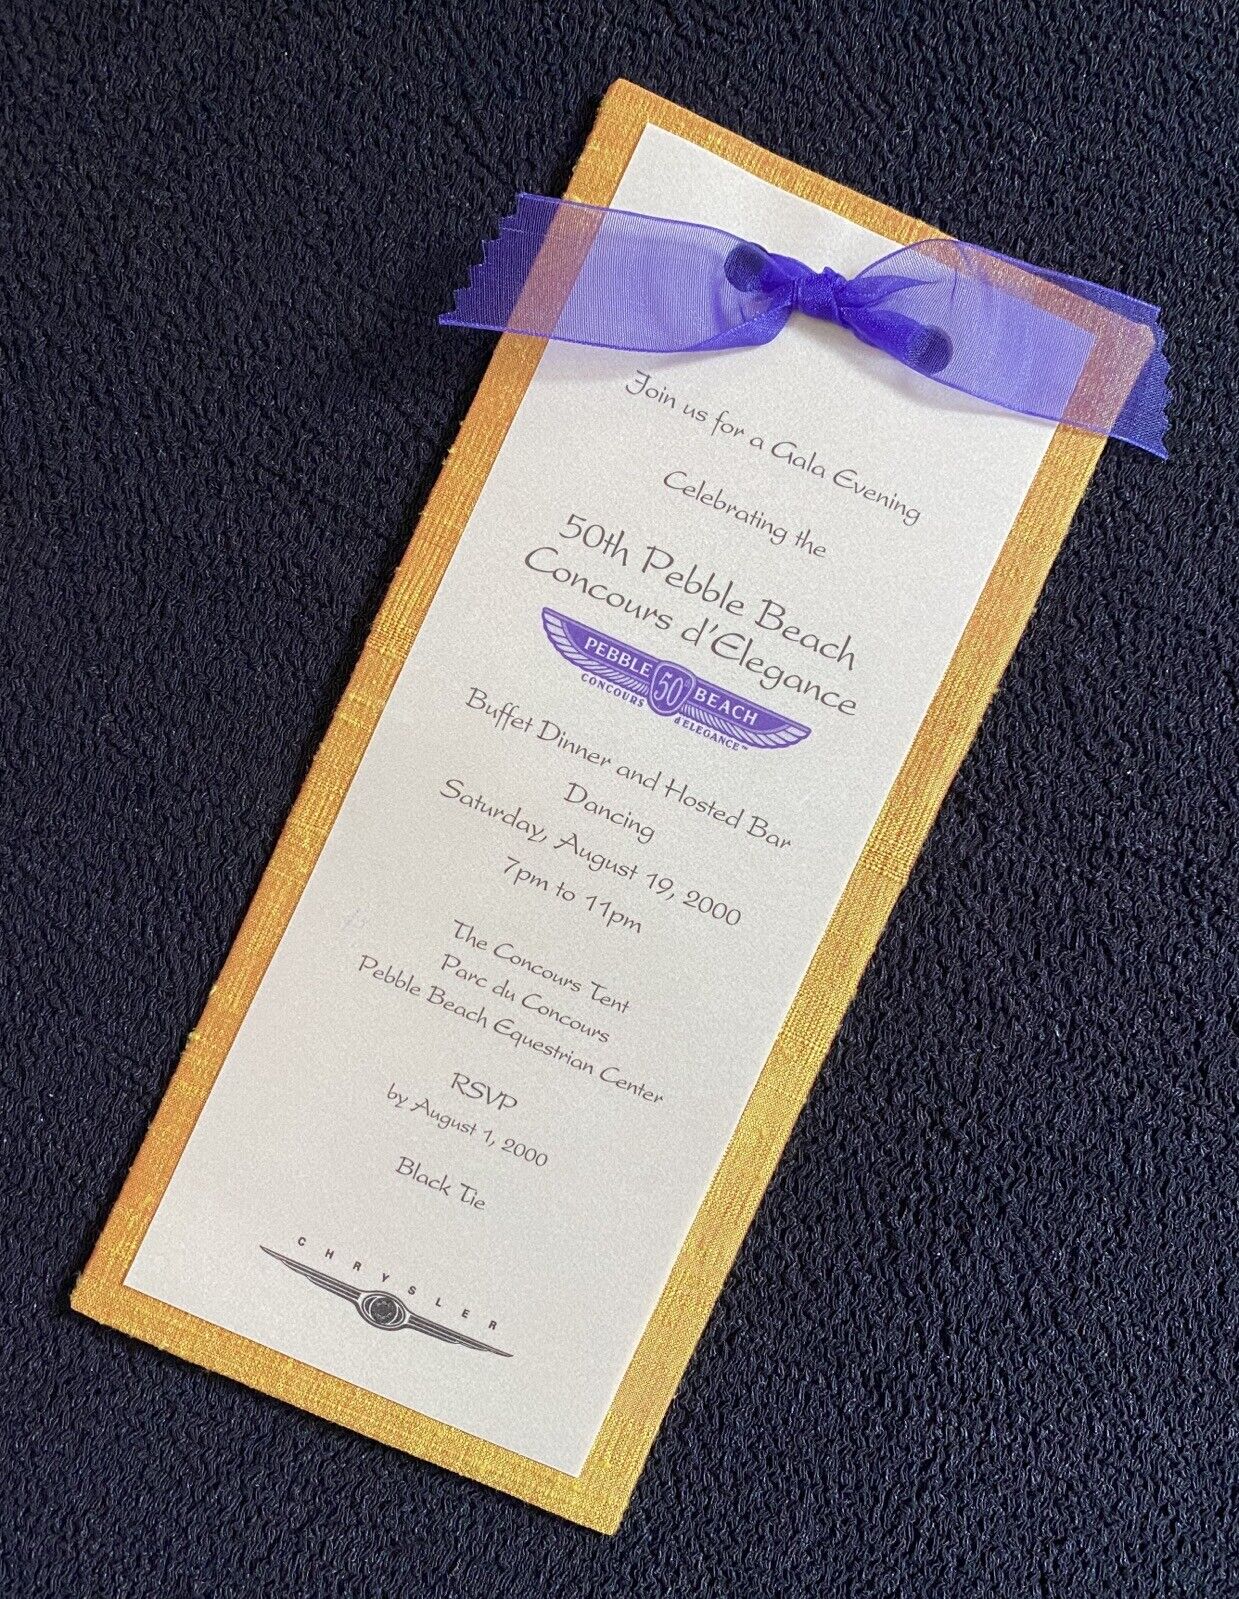 2000 Pebble Beach Concours 50th Anniv Black Tie Gala Dinner Special Event Ticket